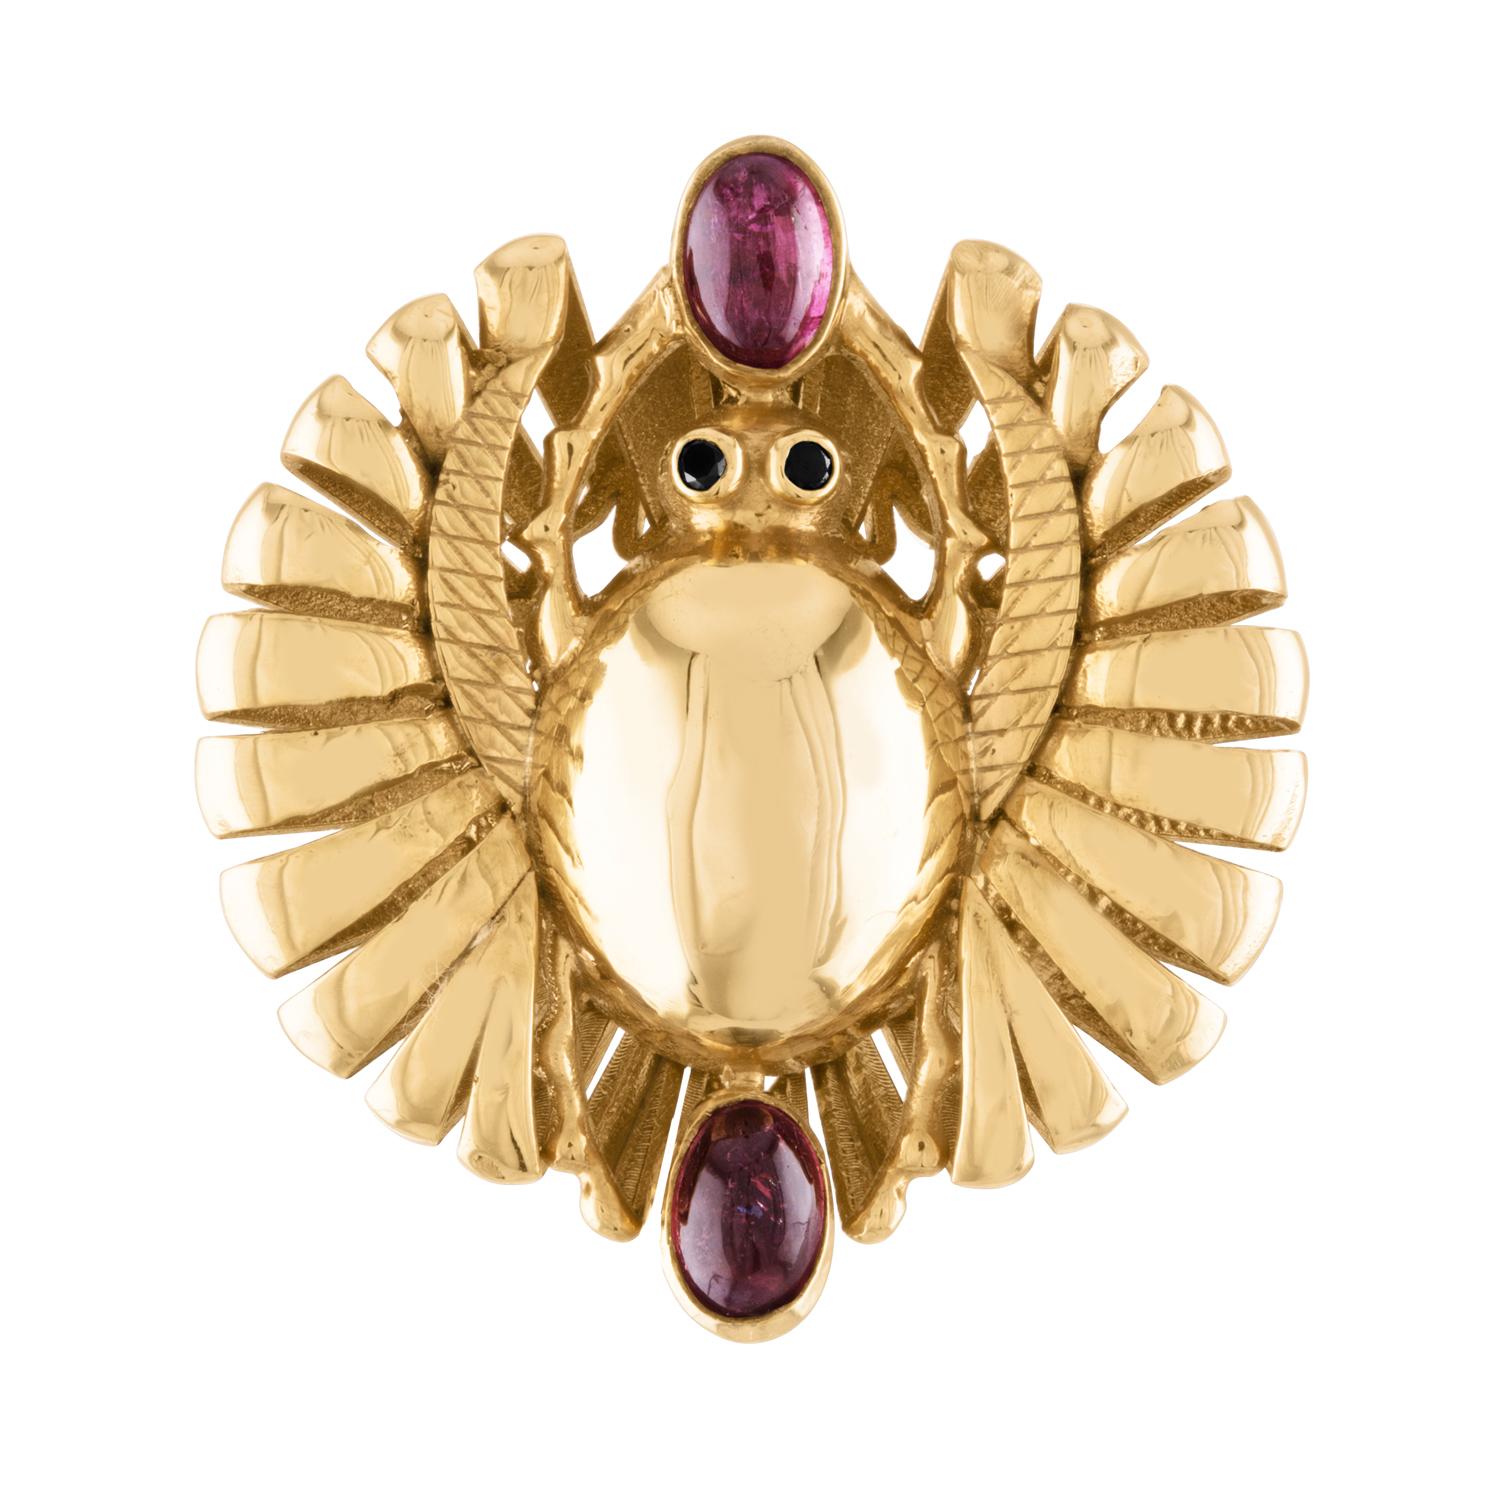 This cocktail ring features an open winged scarab talisman. In Sterling silver or Micron yellow gold plate, this is surely classic and timeless yet contemporary in style. Stones are cabernet red garnets with accents of chocolate diamonds for the